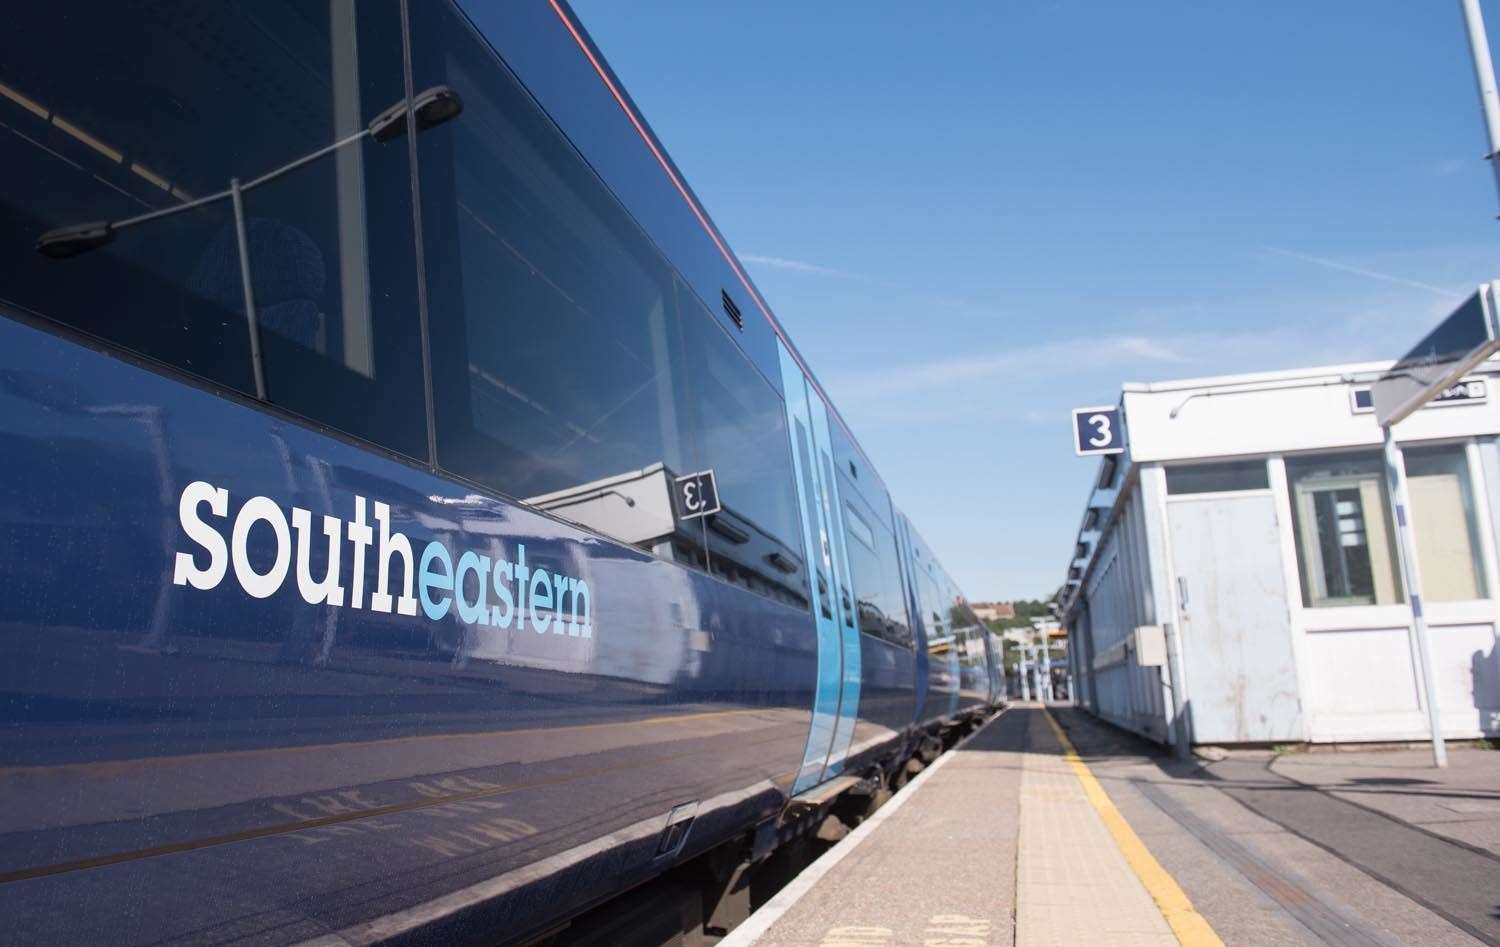 The Go-Ahead Group was stripped of the Southeastern franchise in October